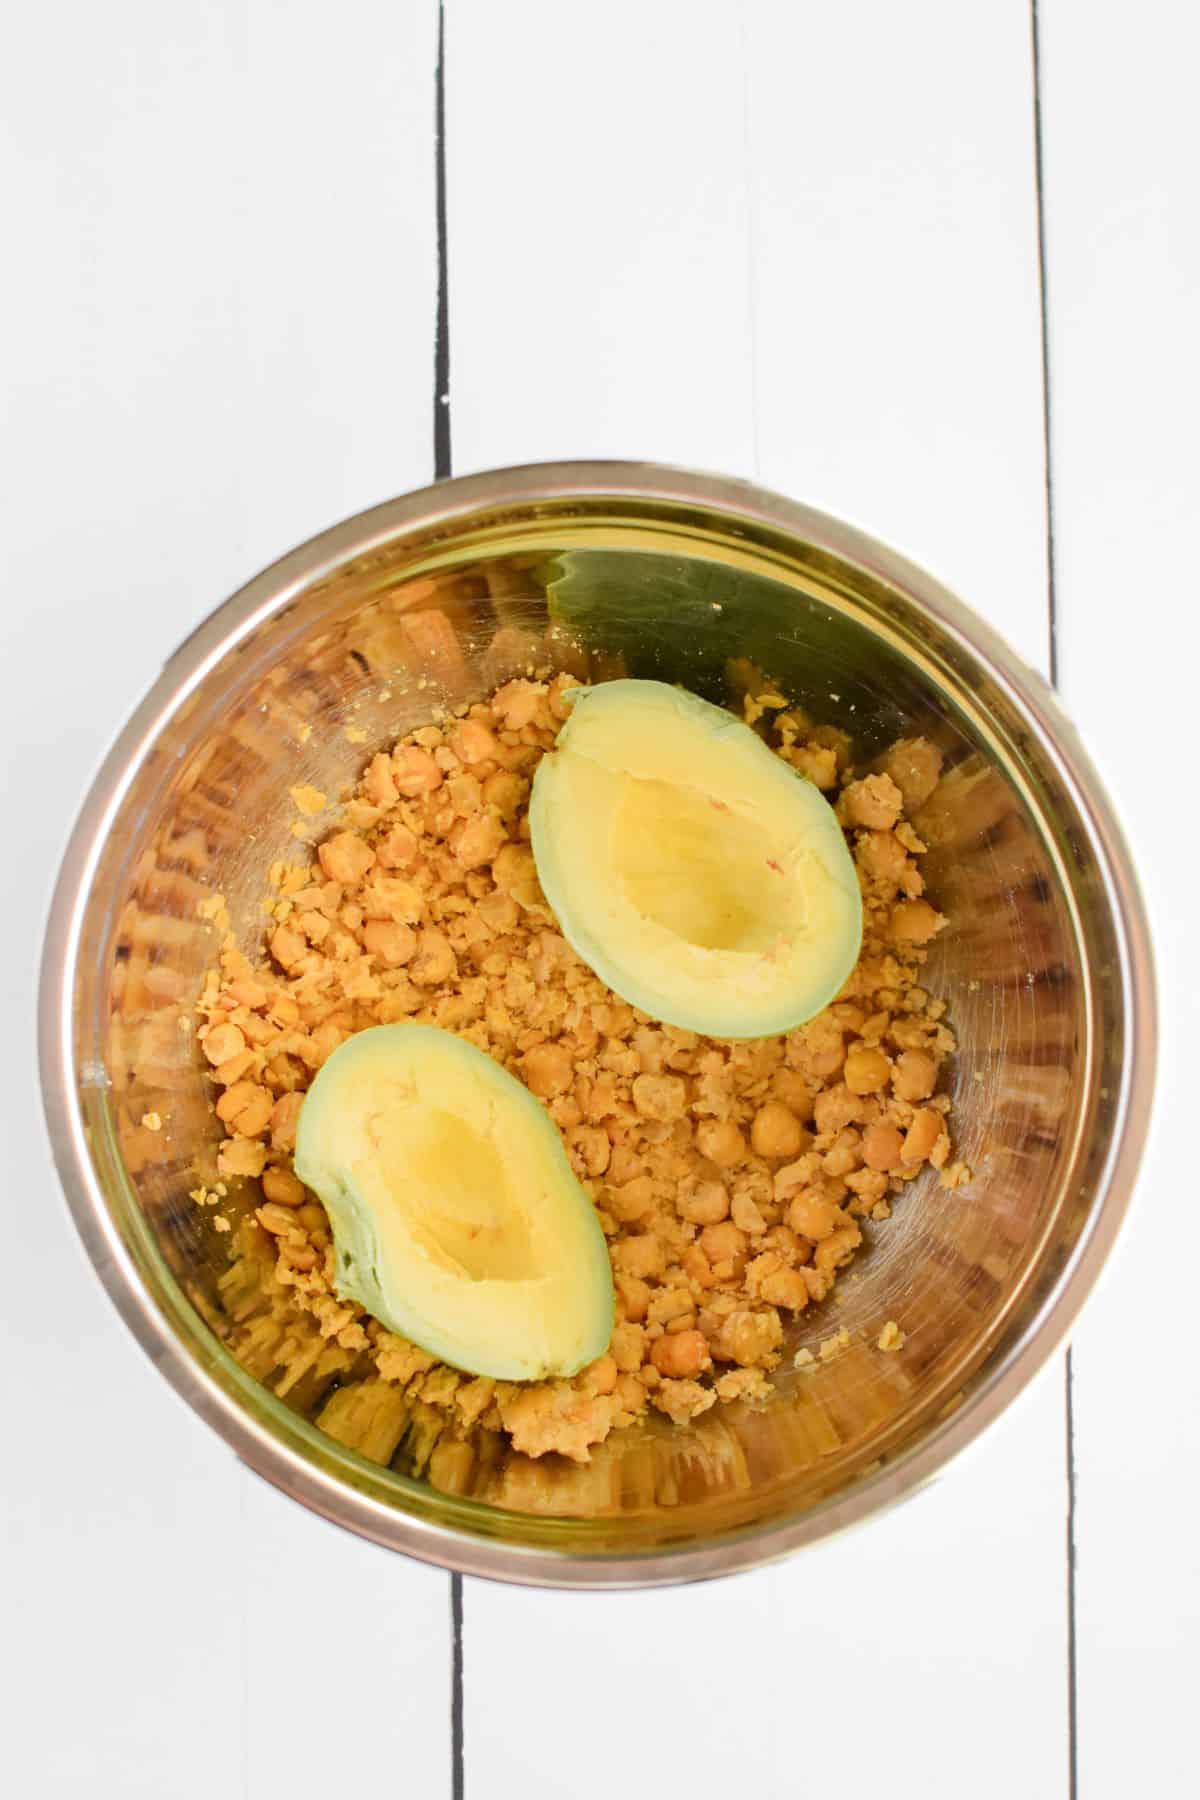 Avocado slices on smashed chickpeas in a bowl.